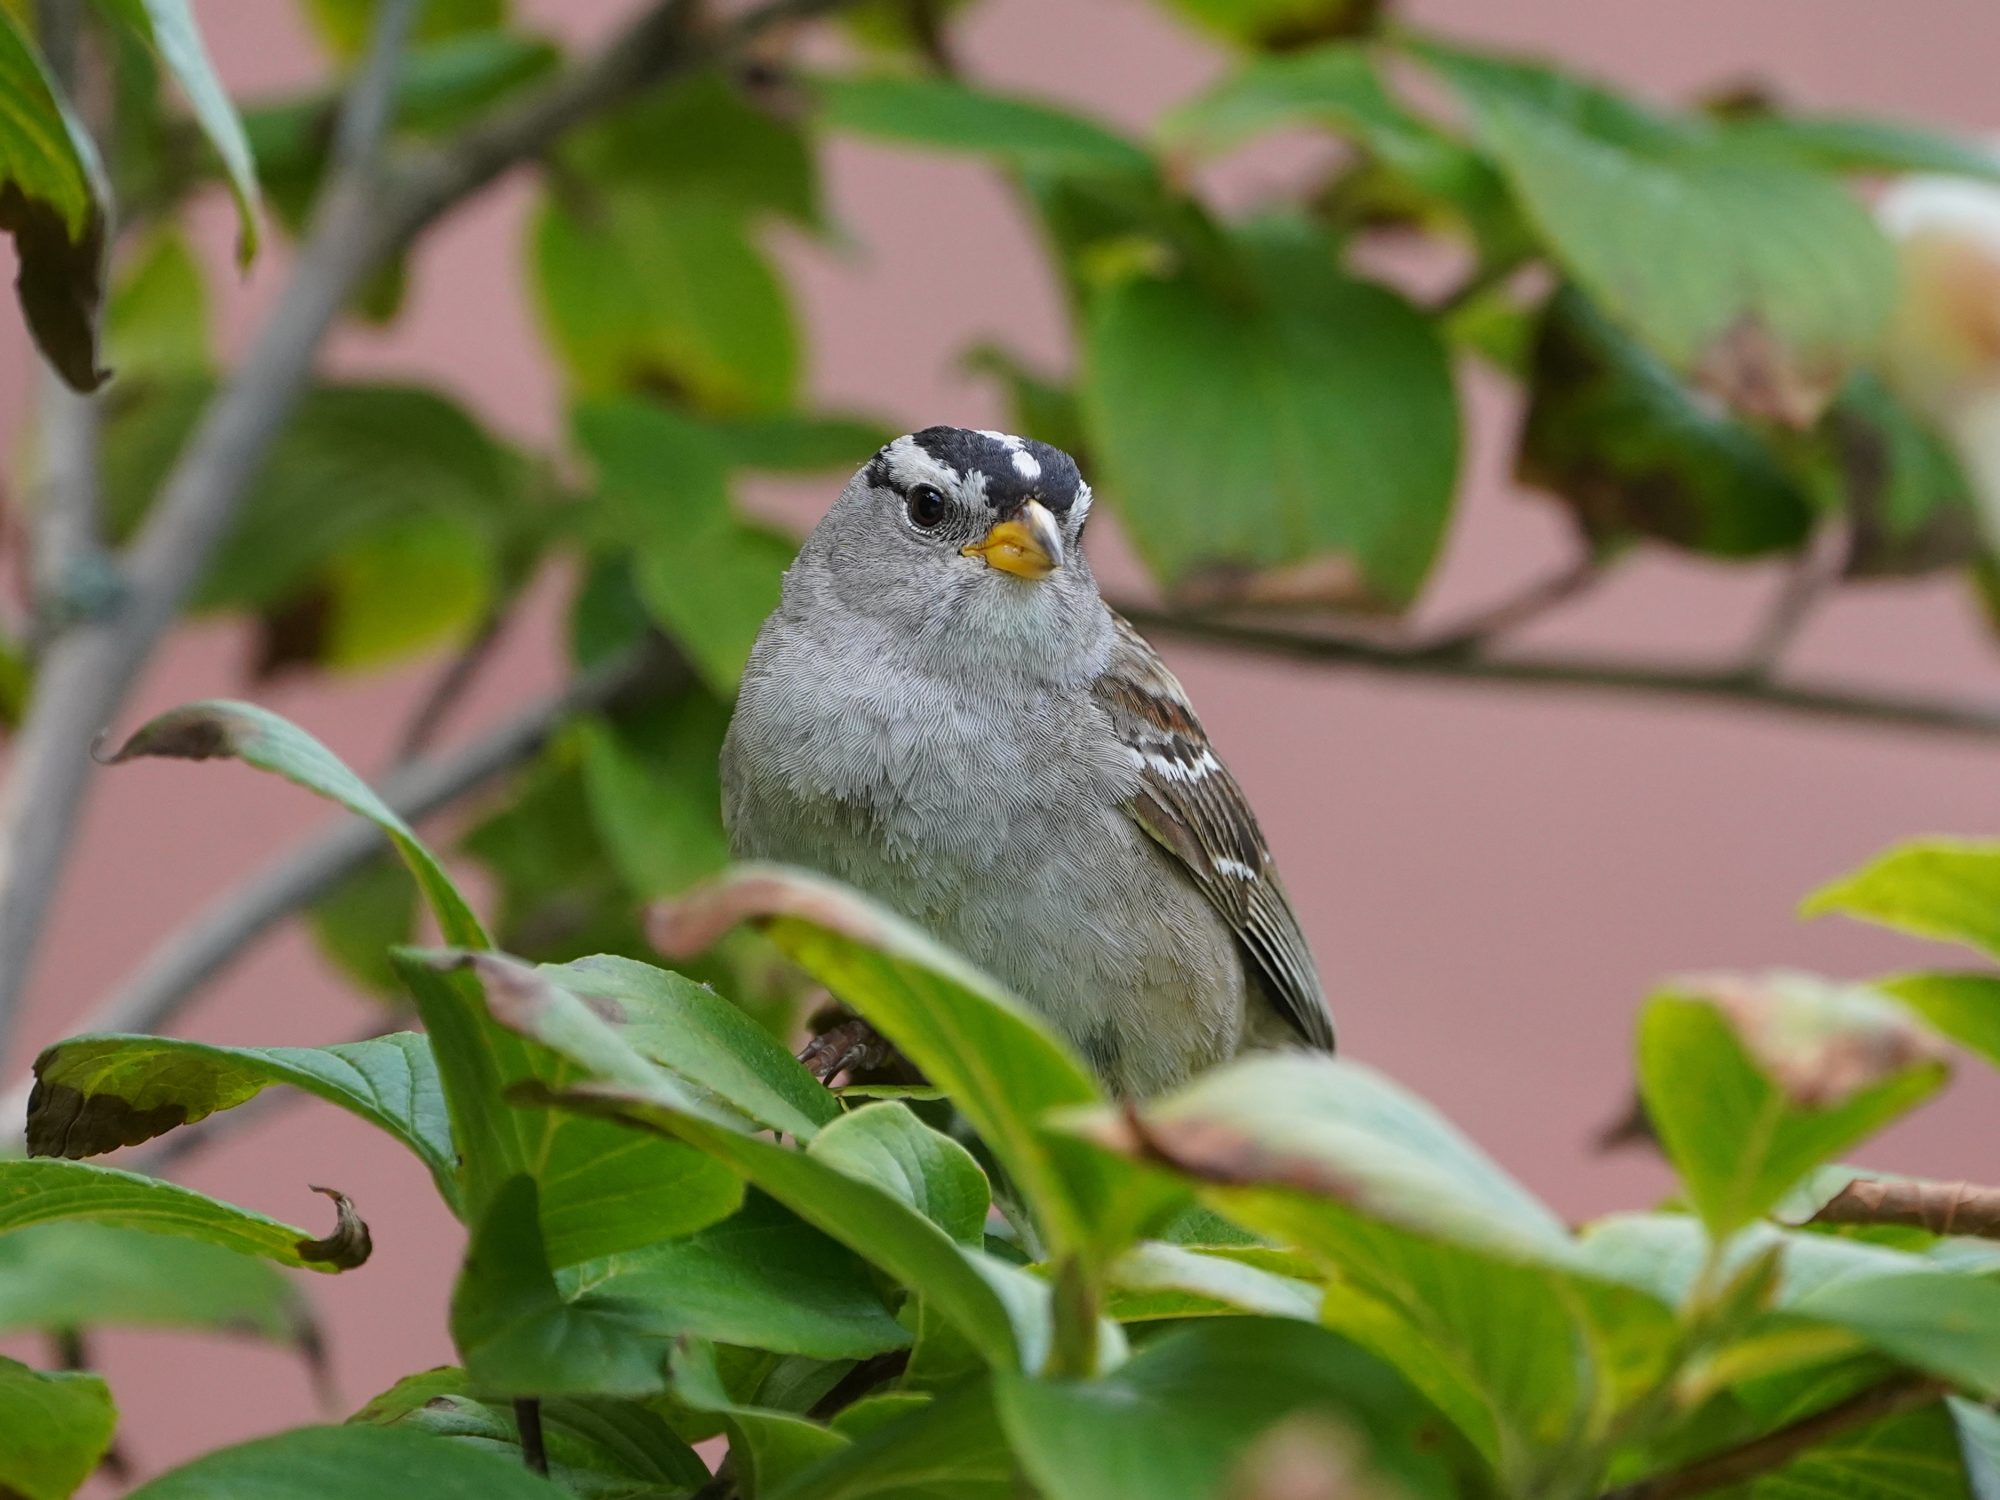 A White-crowned Sparrow in a branch, surrounded by green leaves, with a pinkish wall in the background